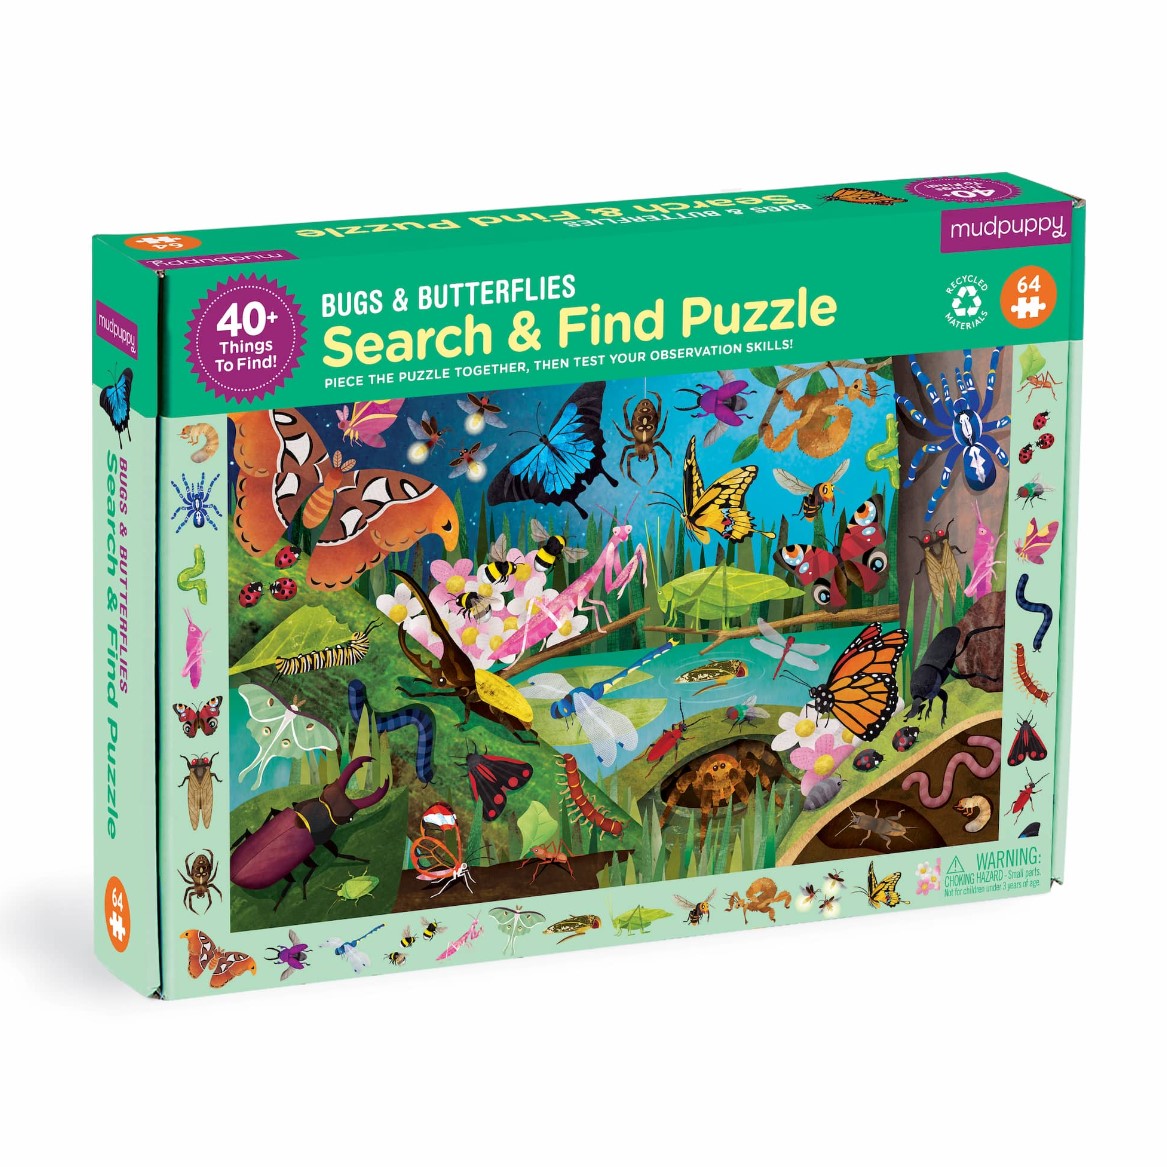 Mud Puppy | Search & Find Puzzle 64pc - Bugs & Butterflies